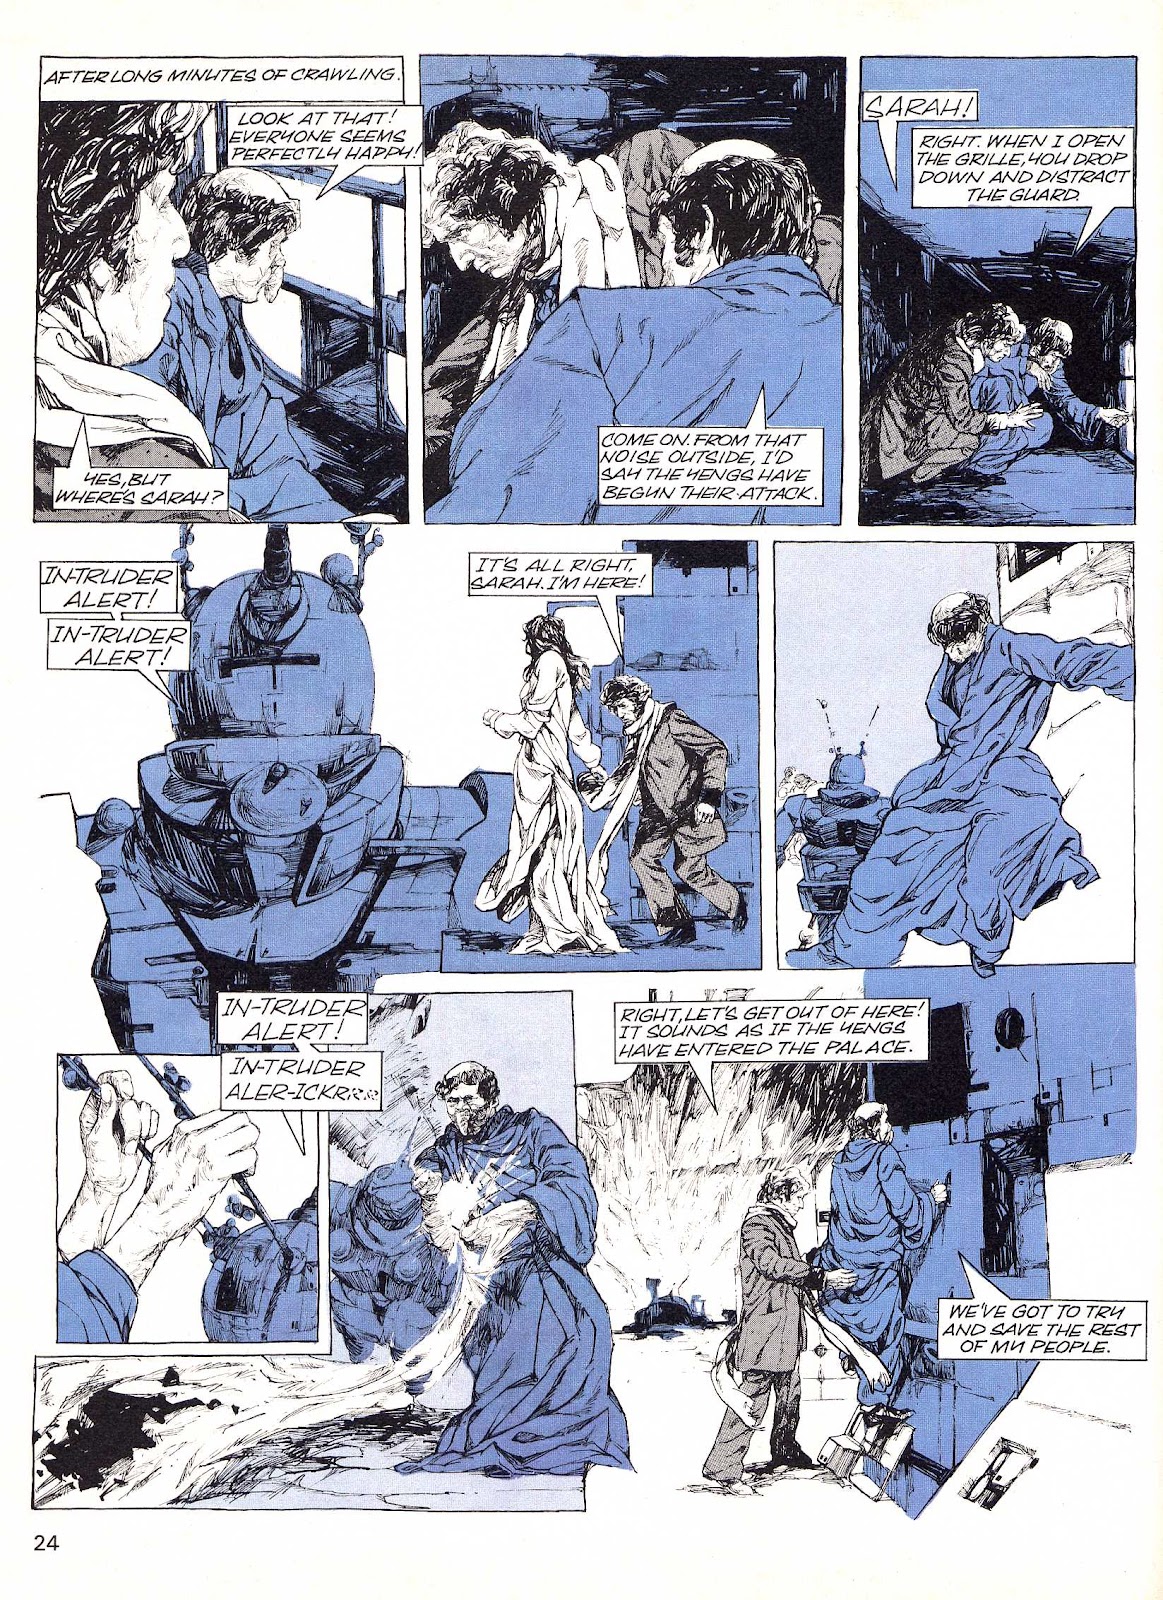 Doctor Who Annual issue 1978 - Page 5